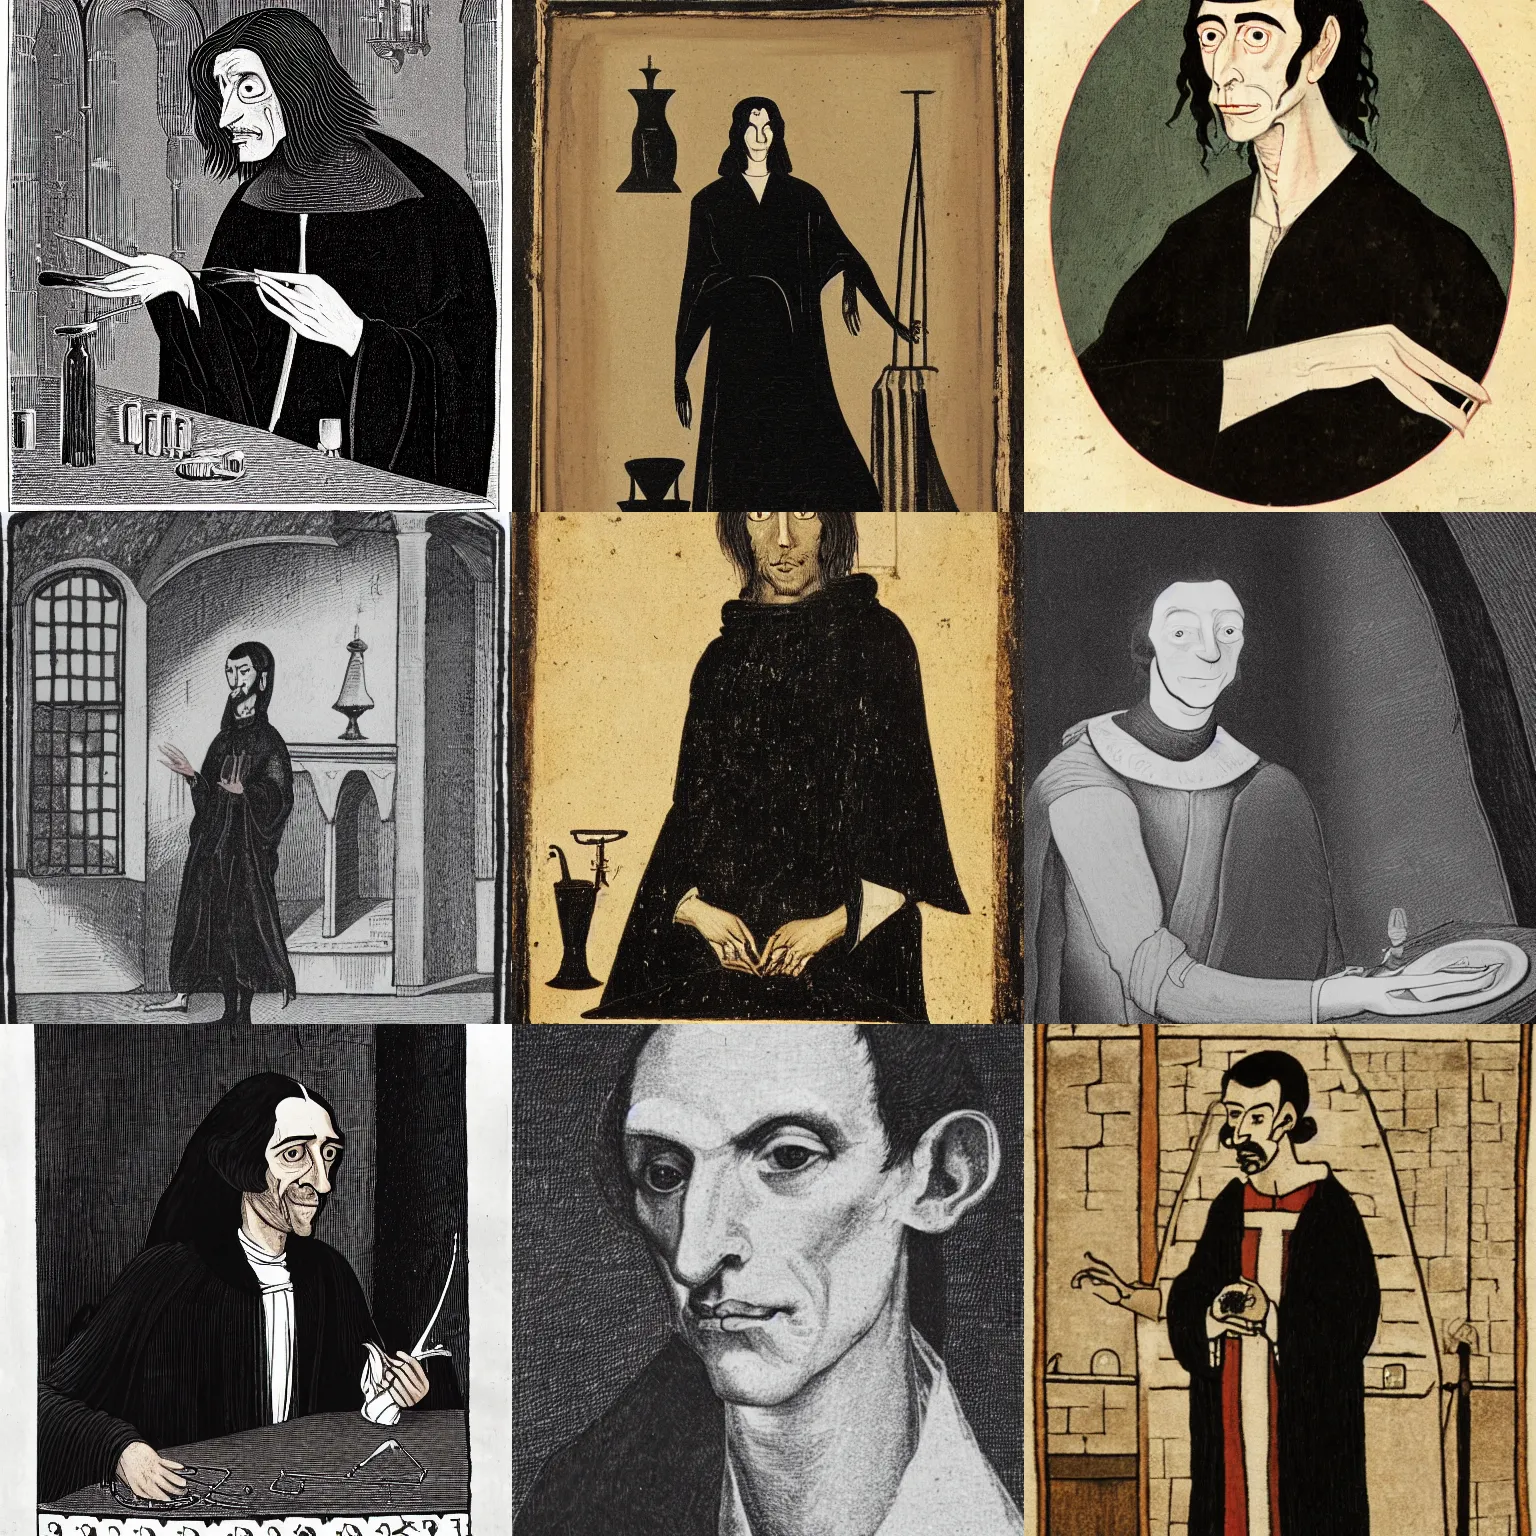 Prompt: Portrait of a thin man with sallow skin, long greasy black hair, a hooked nose and black eyes. He also dresses in a flowing black robe. He is standing in the room of a medieval castle. Potions, magic reagents and lab equipment are littering the tables around him.